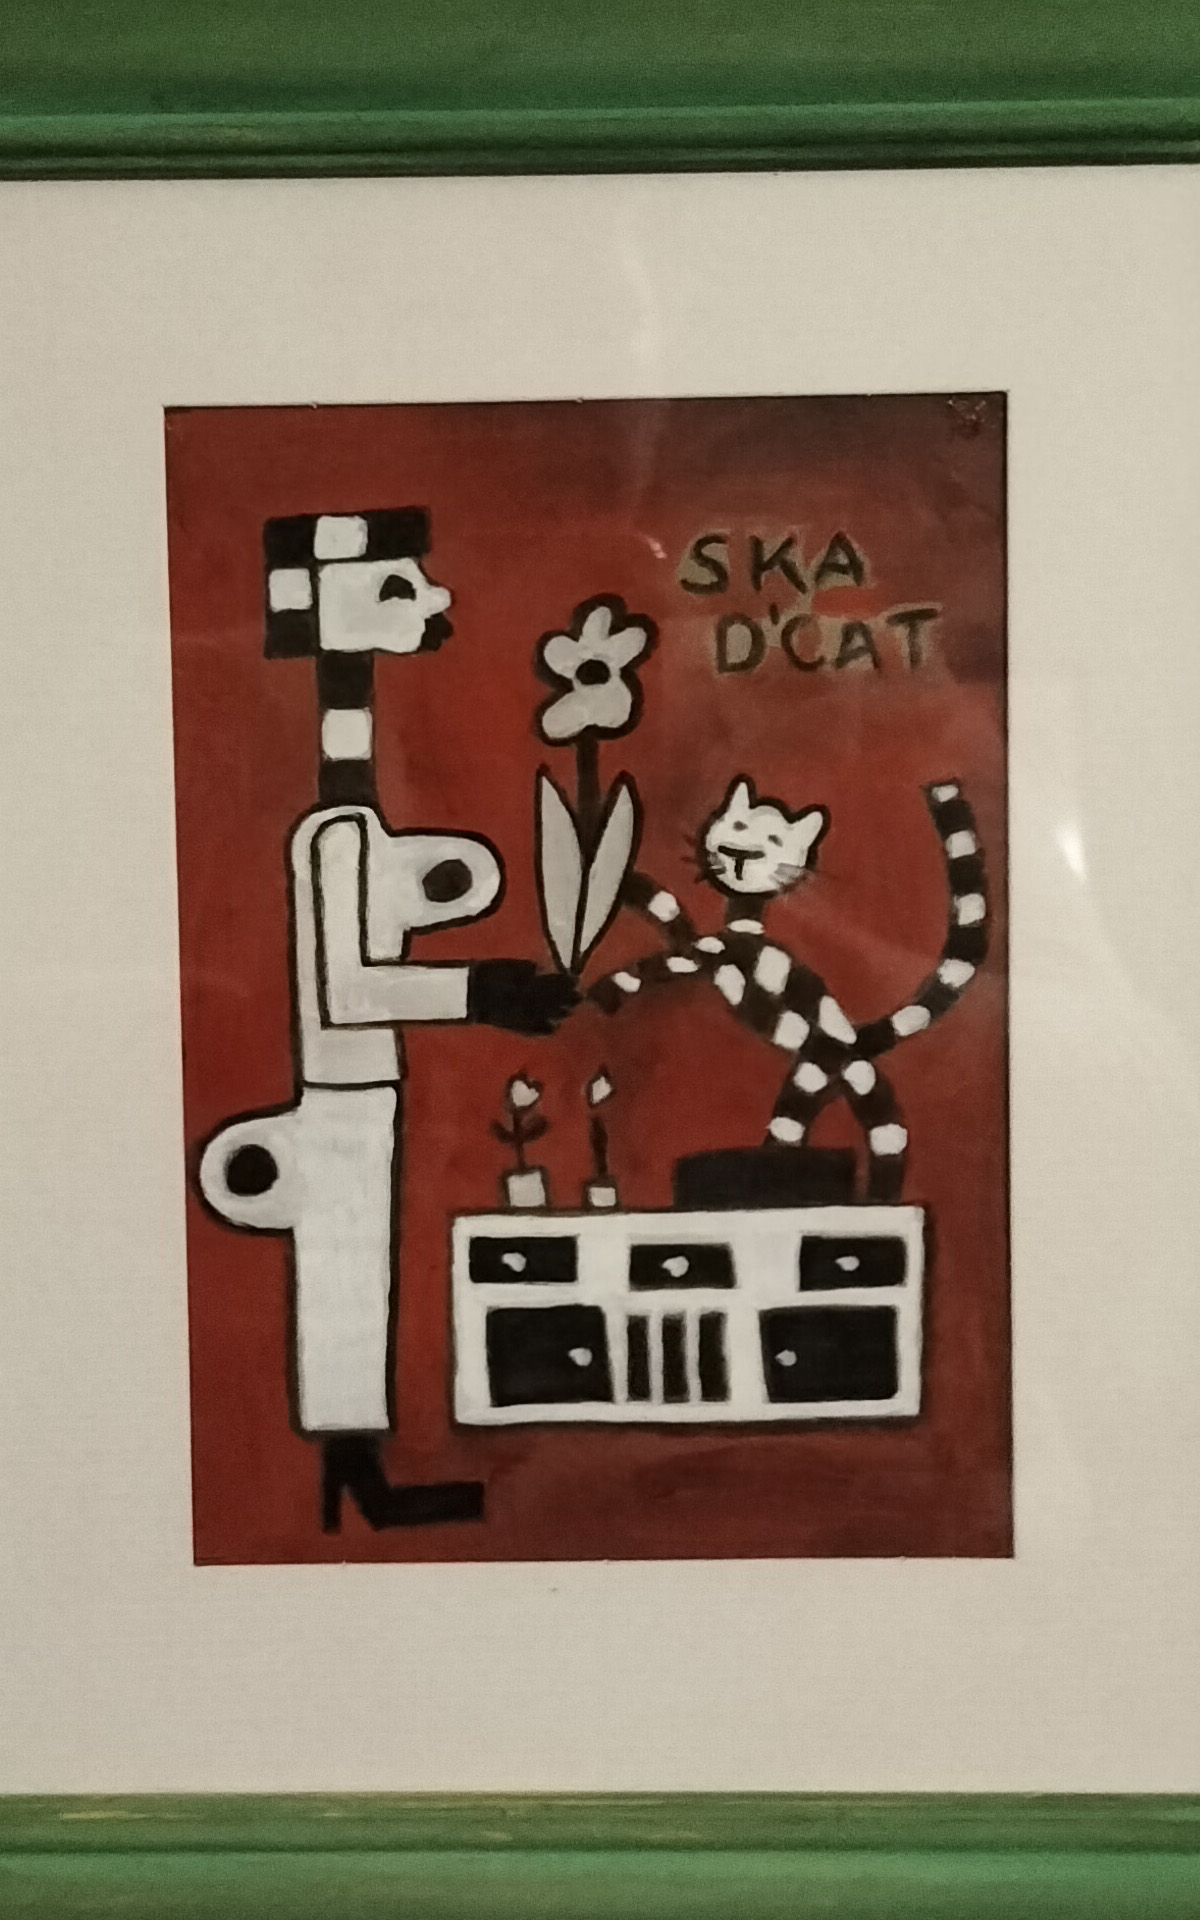 Ska d'cat art work - illustration two tone cat on sideboard with blowers and next to a figure standing up